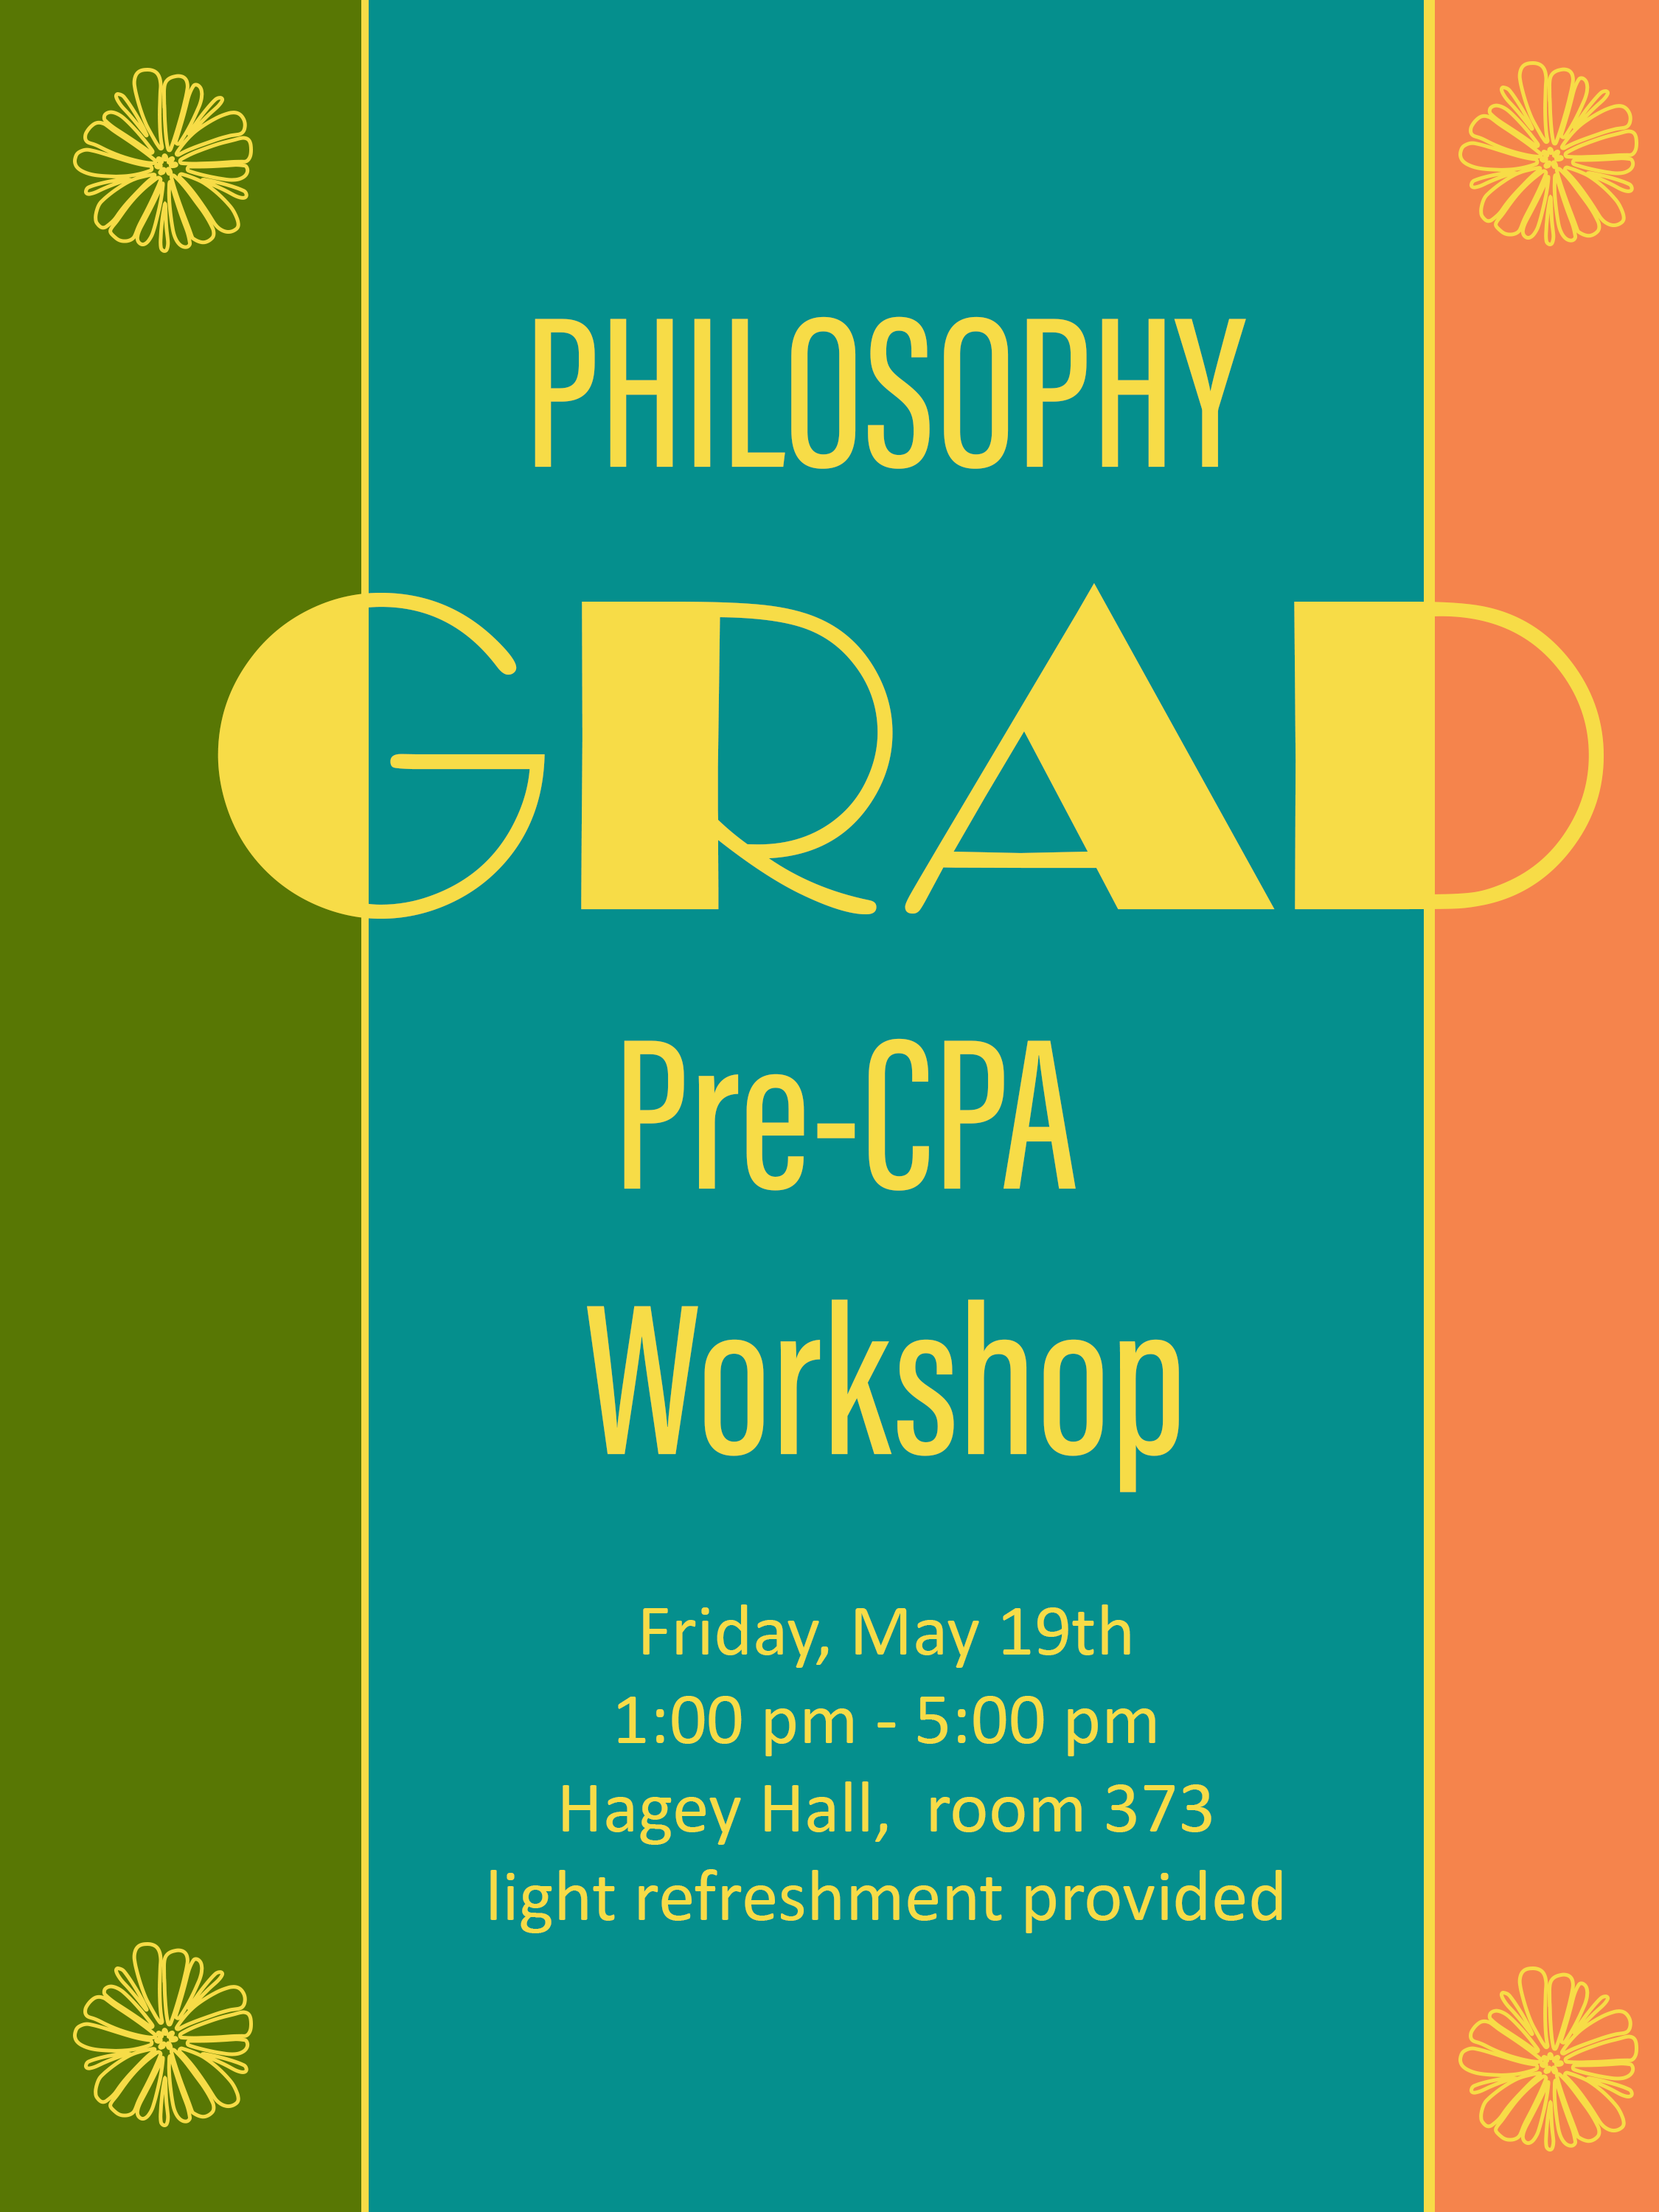 Philosophy Grad Pre-CPA workshop event , three stipes green teal and muted orange with date, time and room (repeated below)